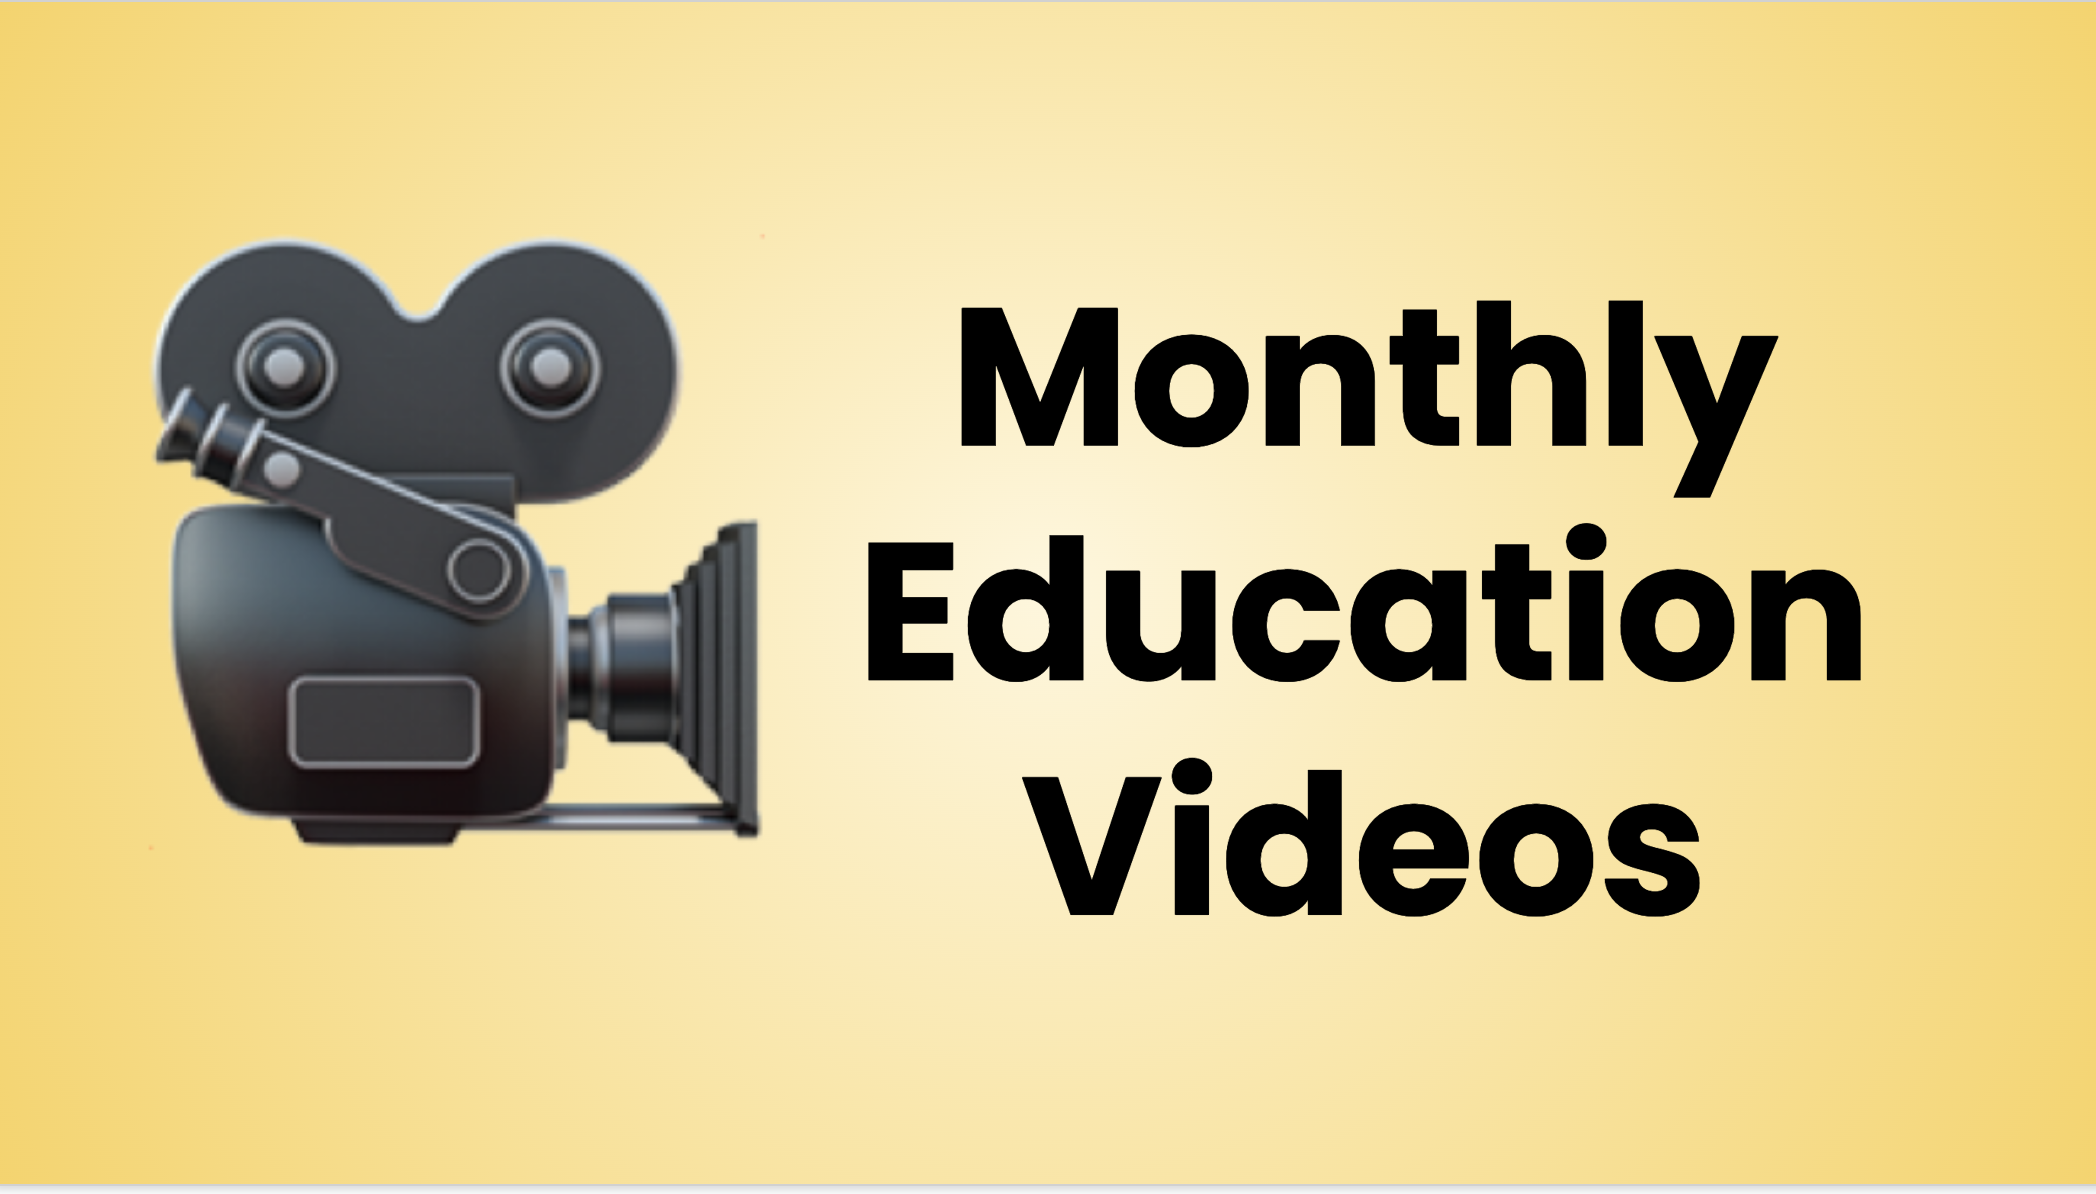 Monthly Education Videos